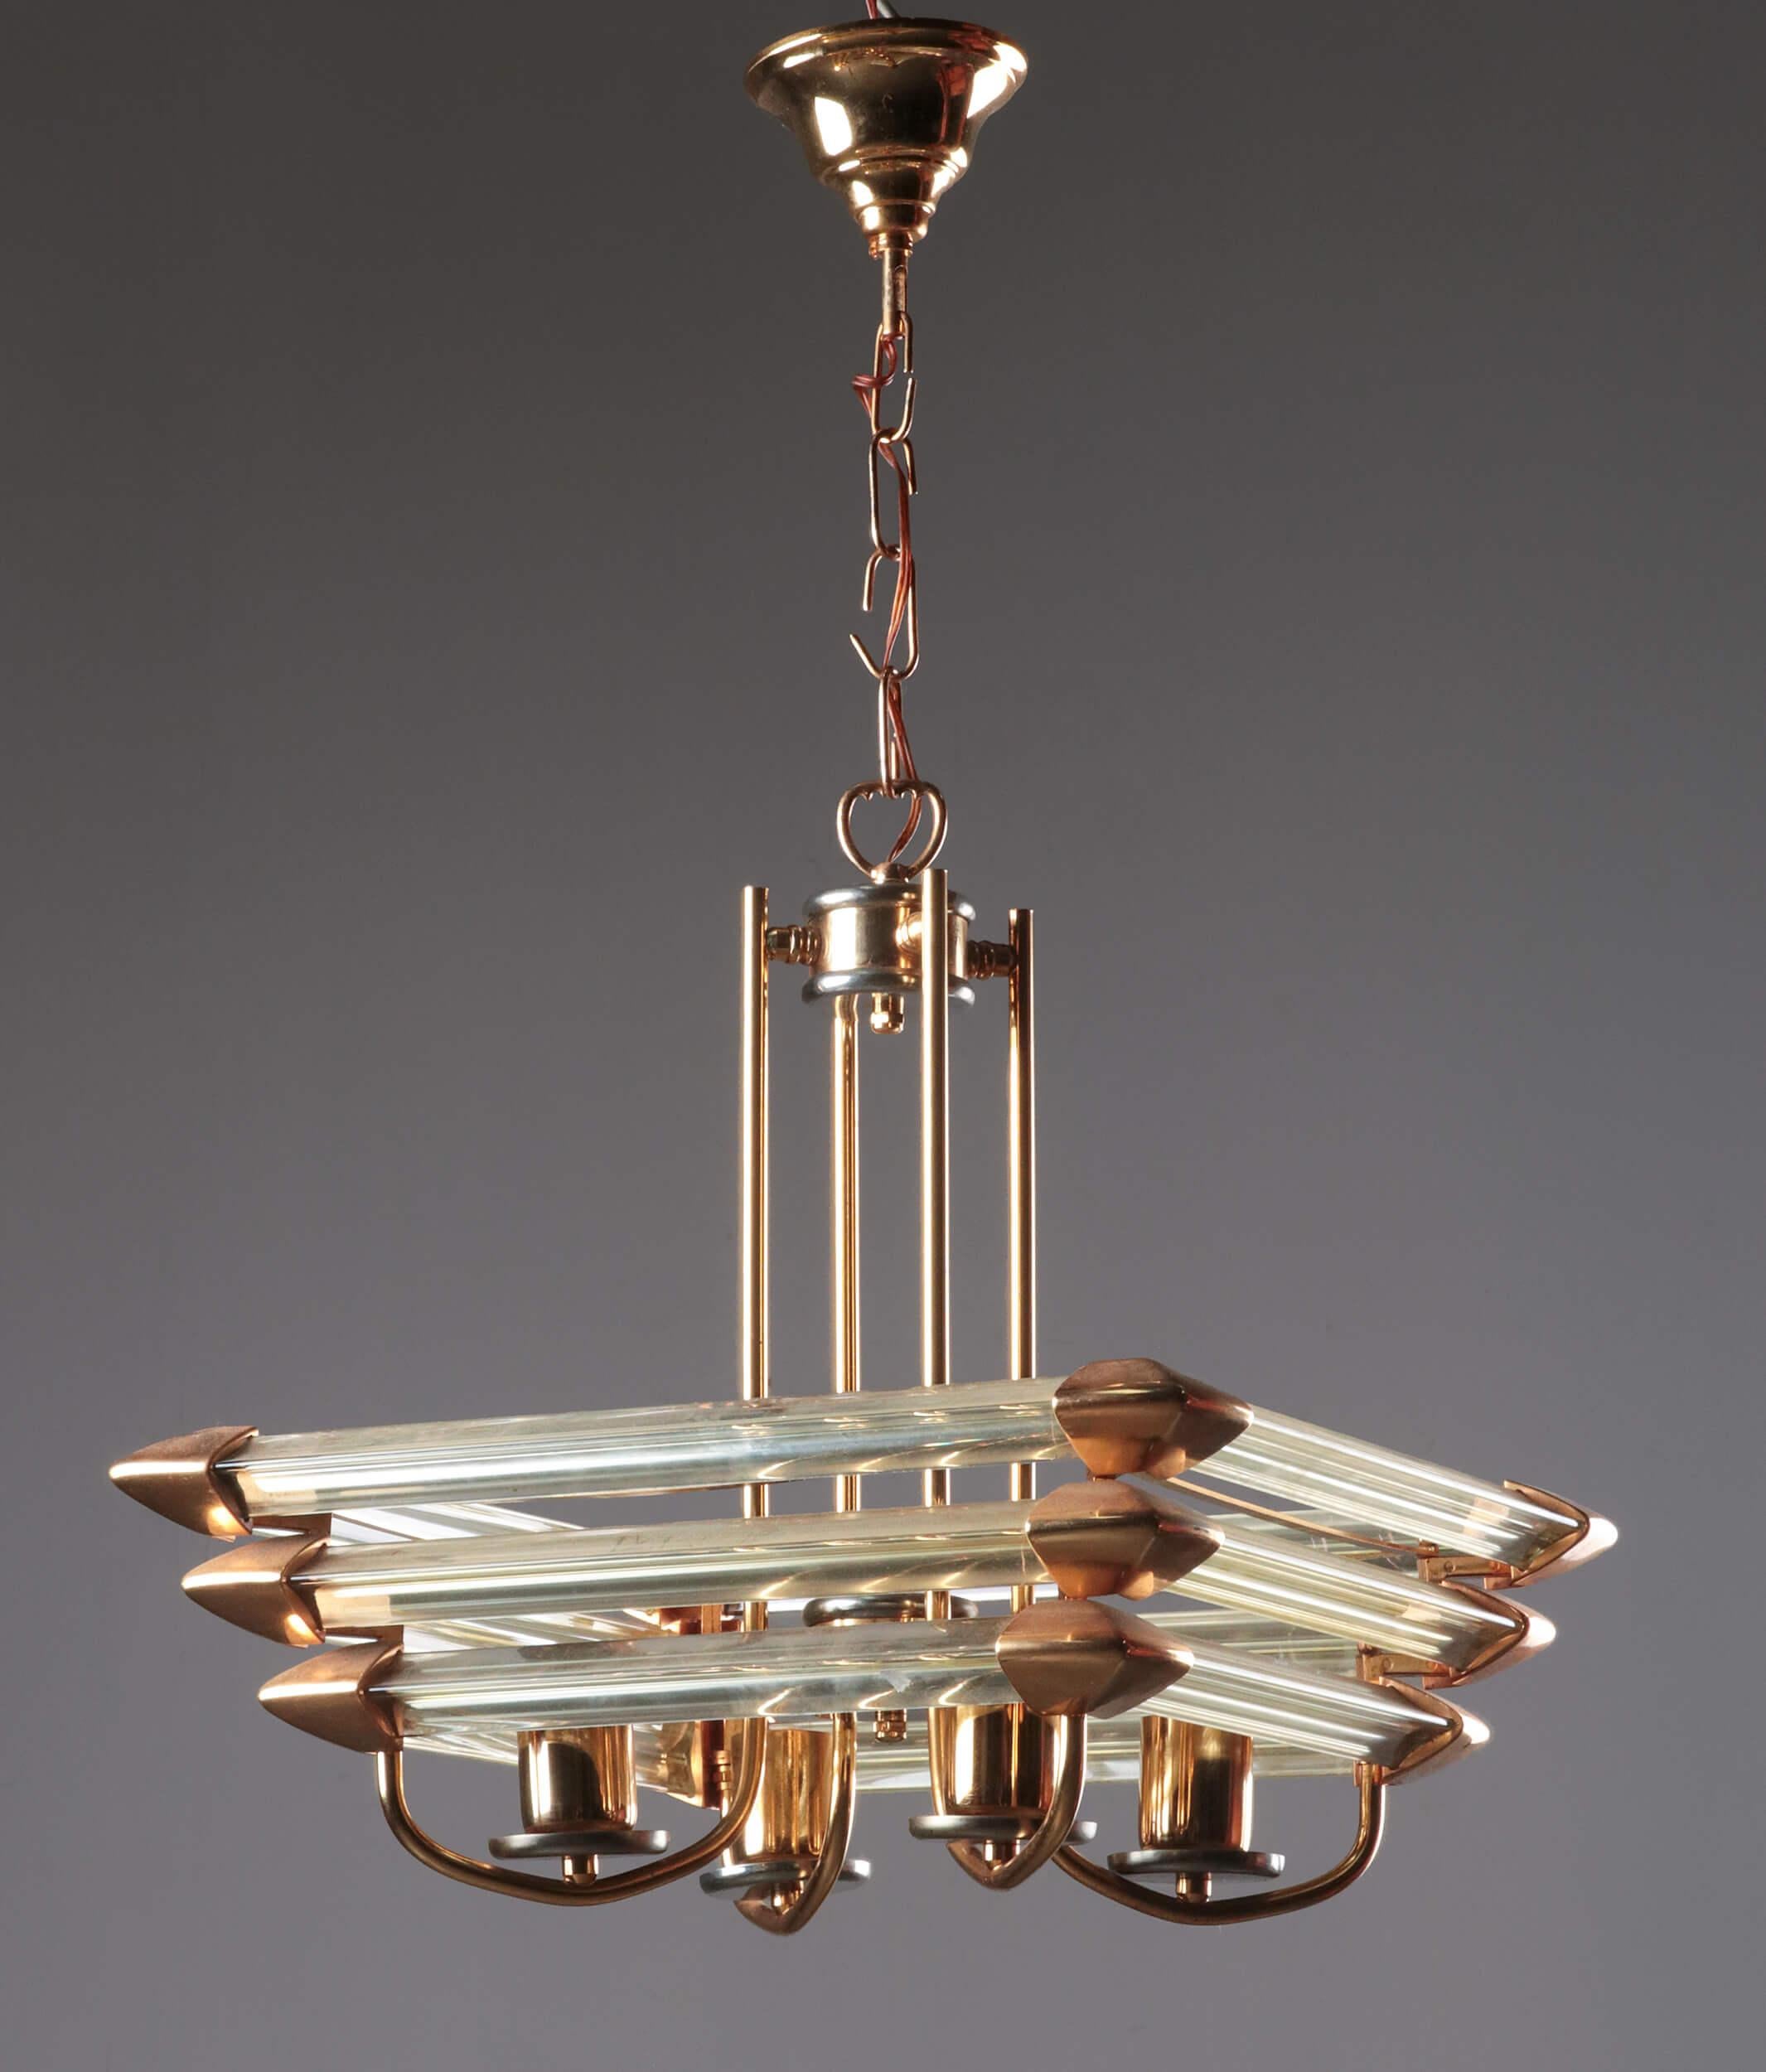 Beautiful lamp with a striking design. The frame is made of copper, and the lamp is covered with prism shaped glass. When the light is on, this gives a particularly beautiful effect. The lamp has four light points. The lamp functions and is in a